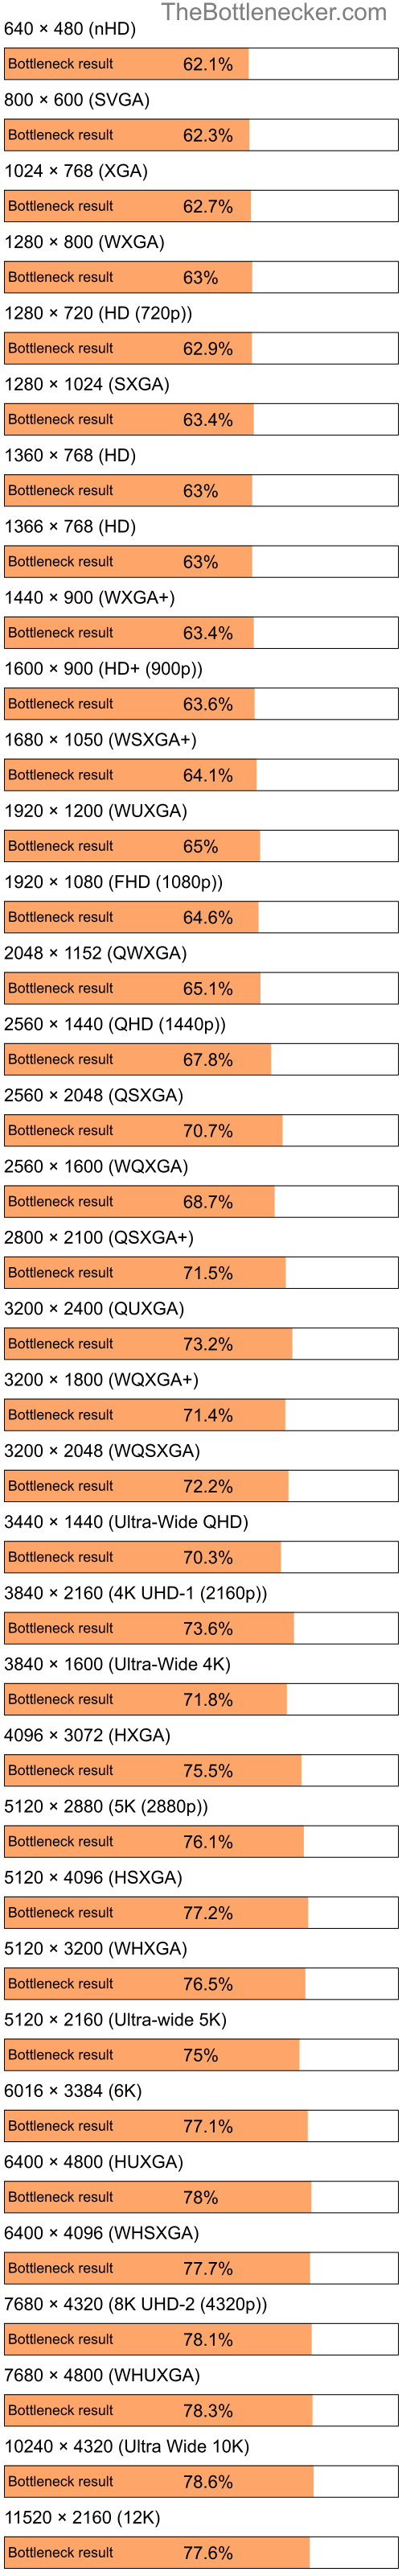 Bottleneck results by resolution for Intel Pentium 4 and NVIDIA GeForce 9300 GS in General Tasks